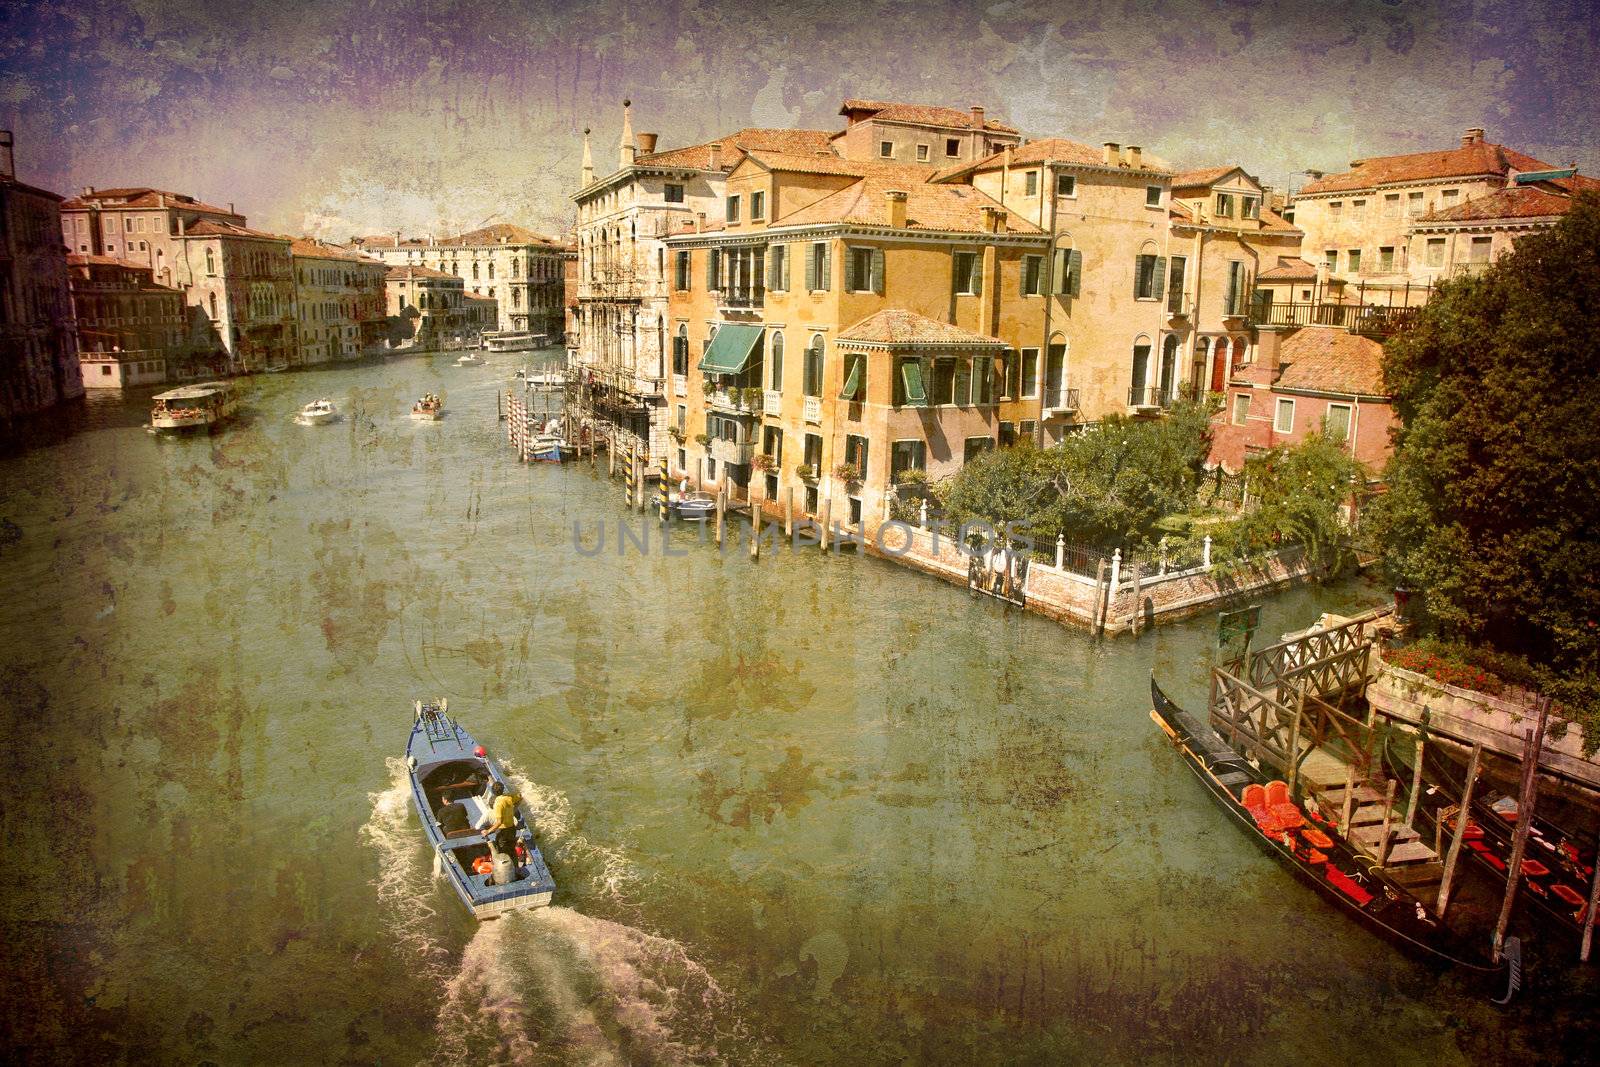 Artistic work of my own in retro style - Postcard from Italy. - Grand Canal - Venice.